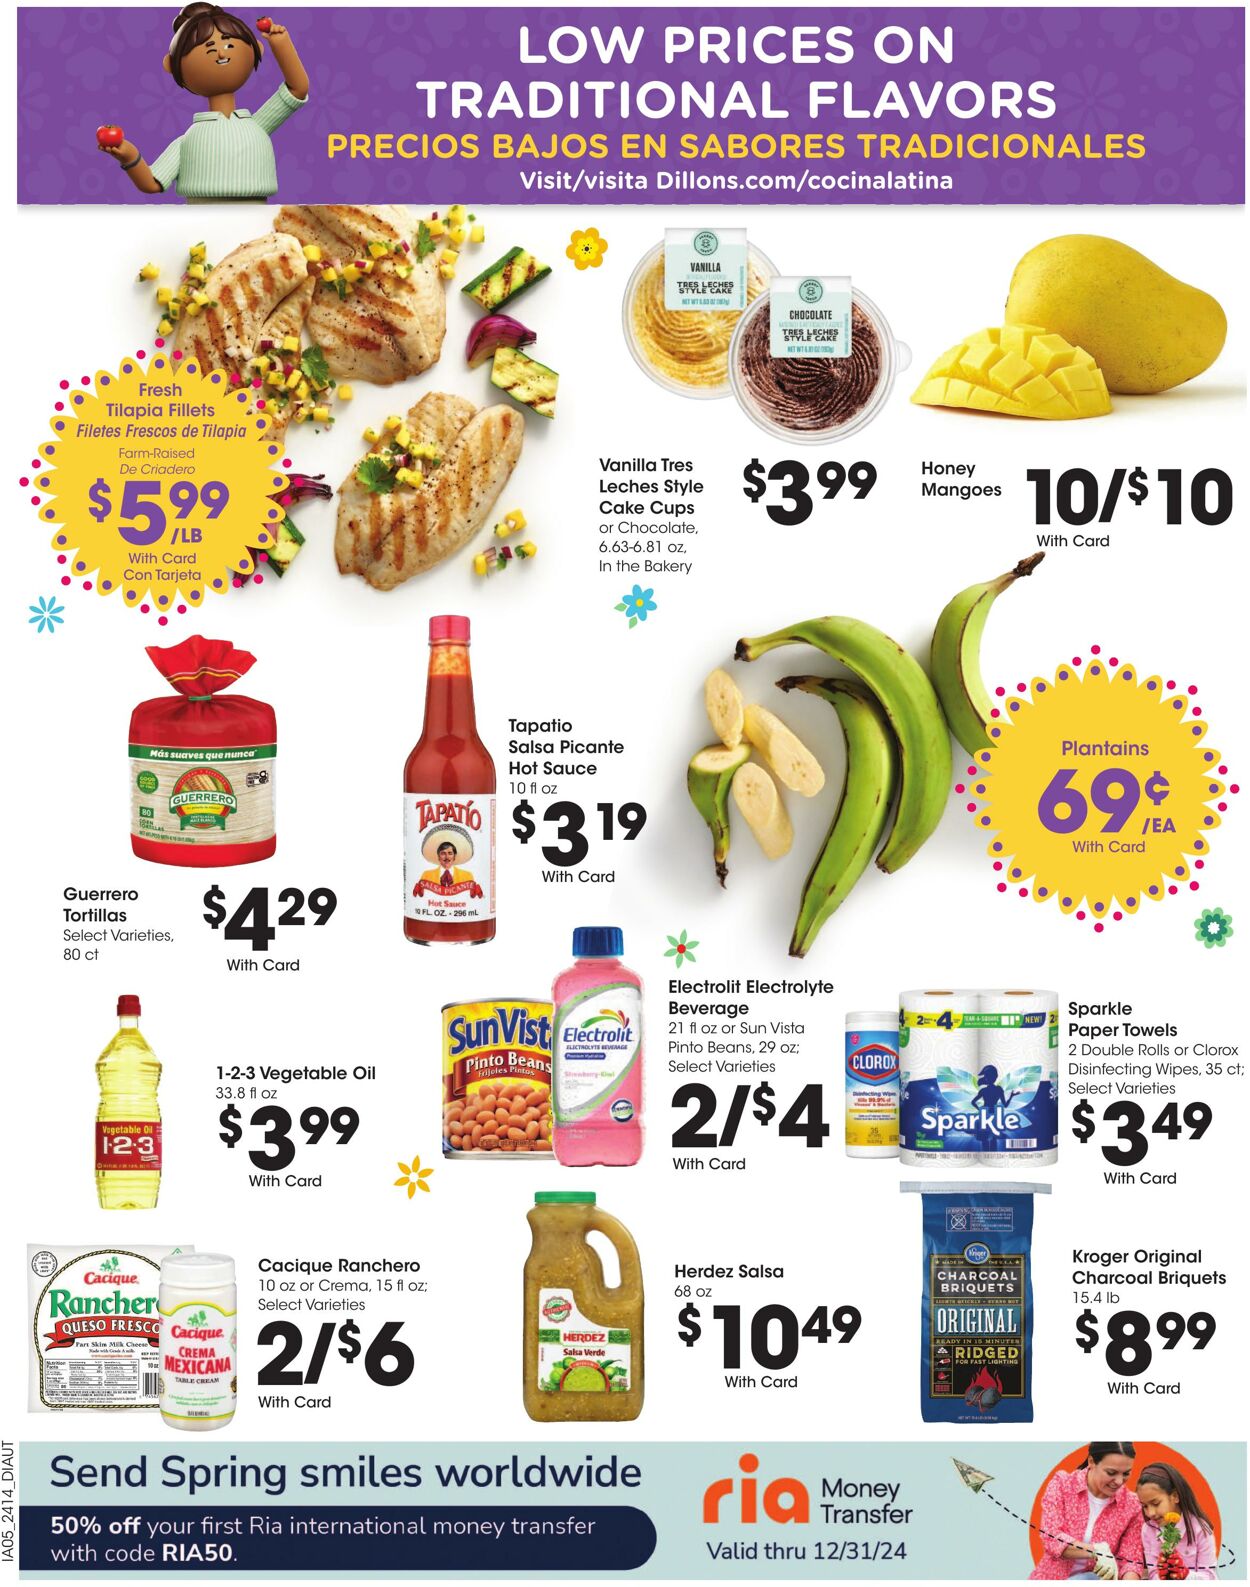 Weekly ad Baker's 05/08/2024 - 05/14/2024